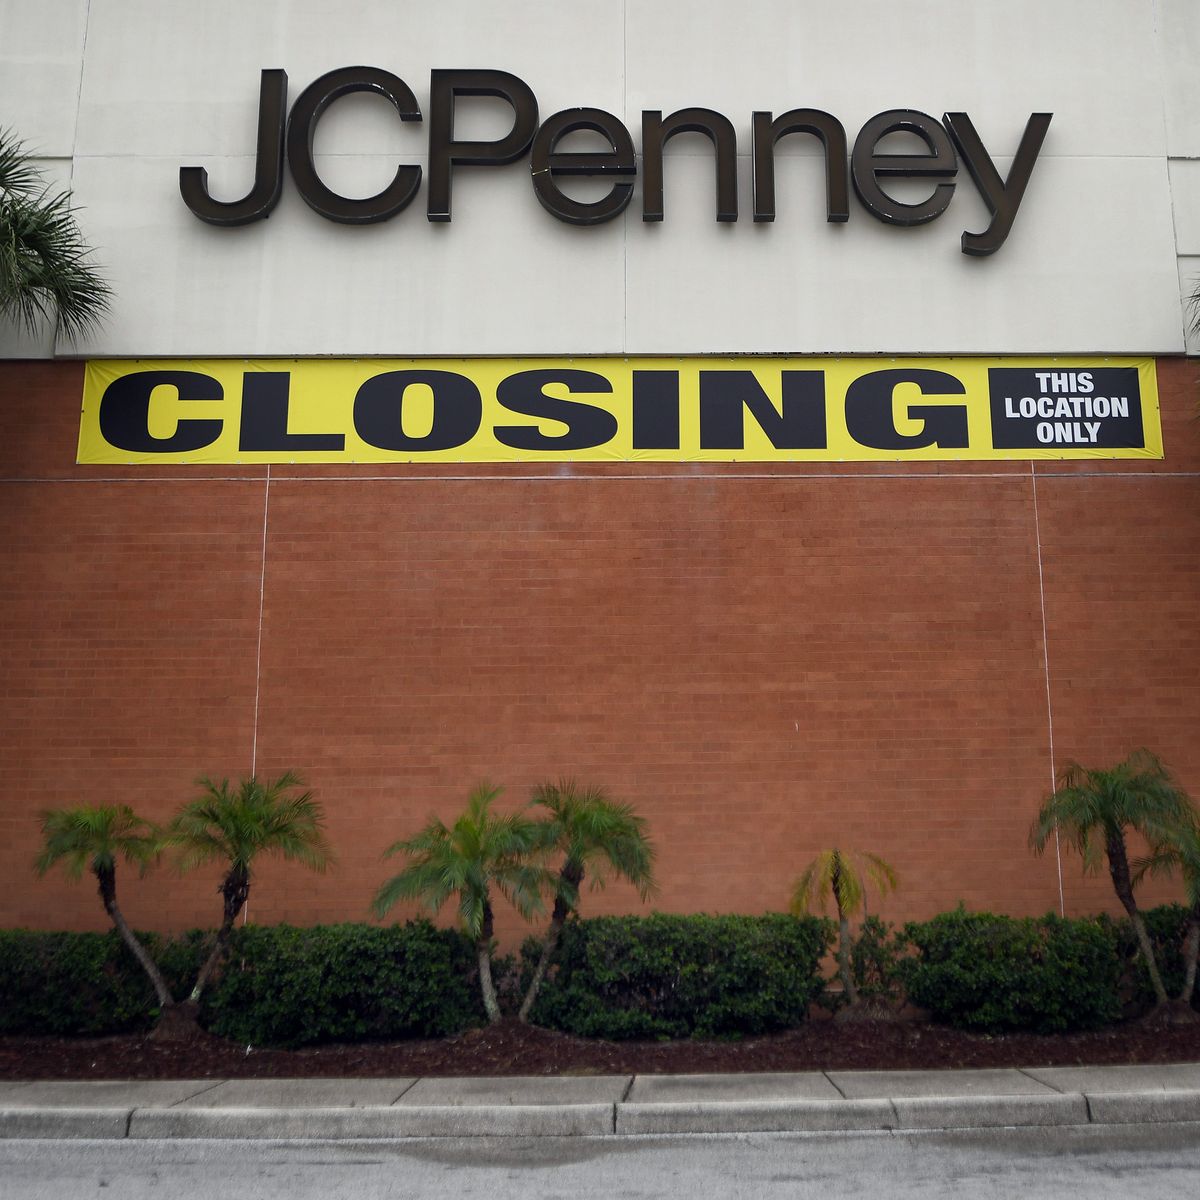 JCPenney Deals March 2024: Find JCPenney Sales and Promotions